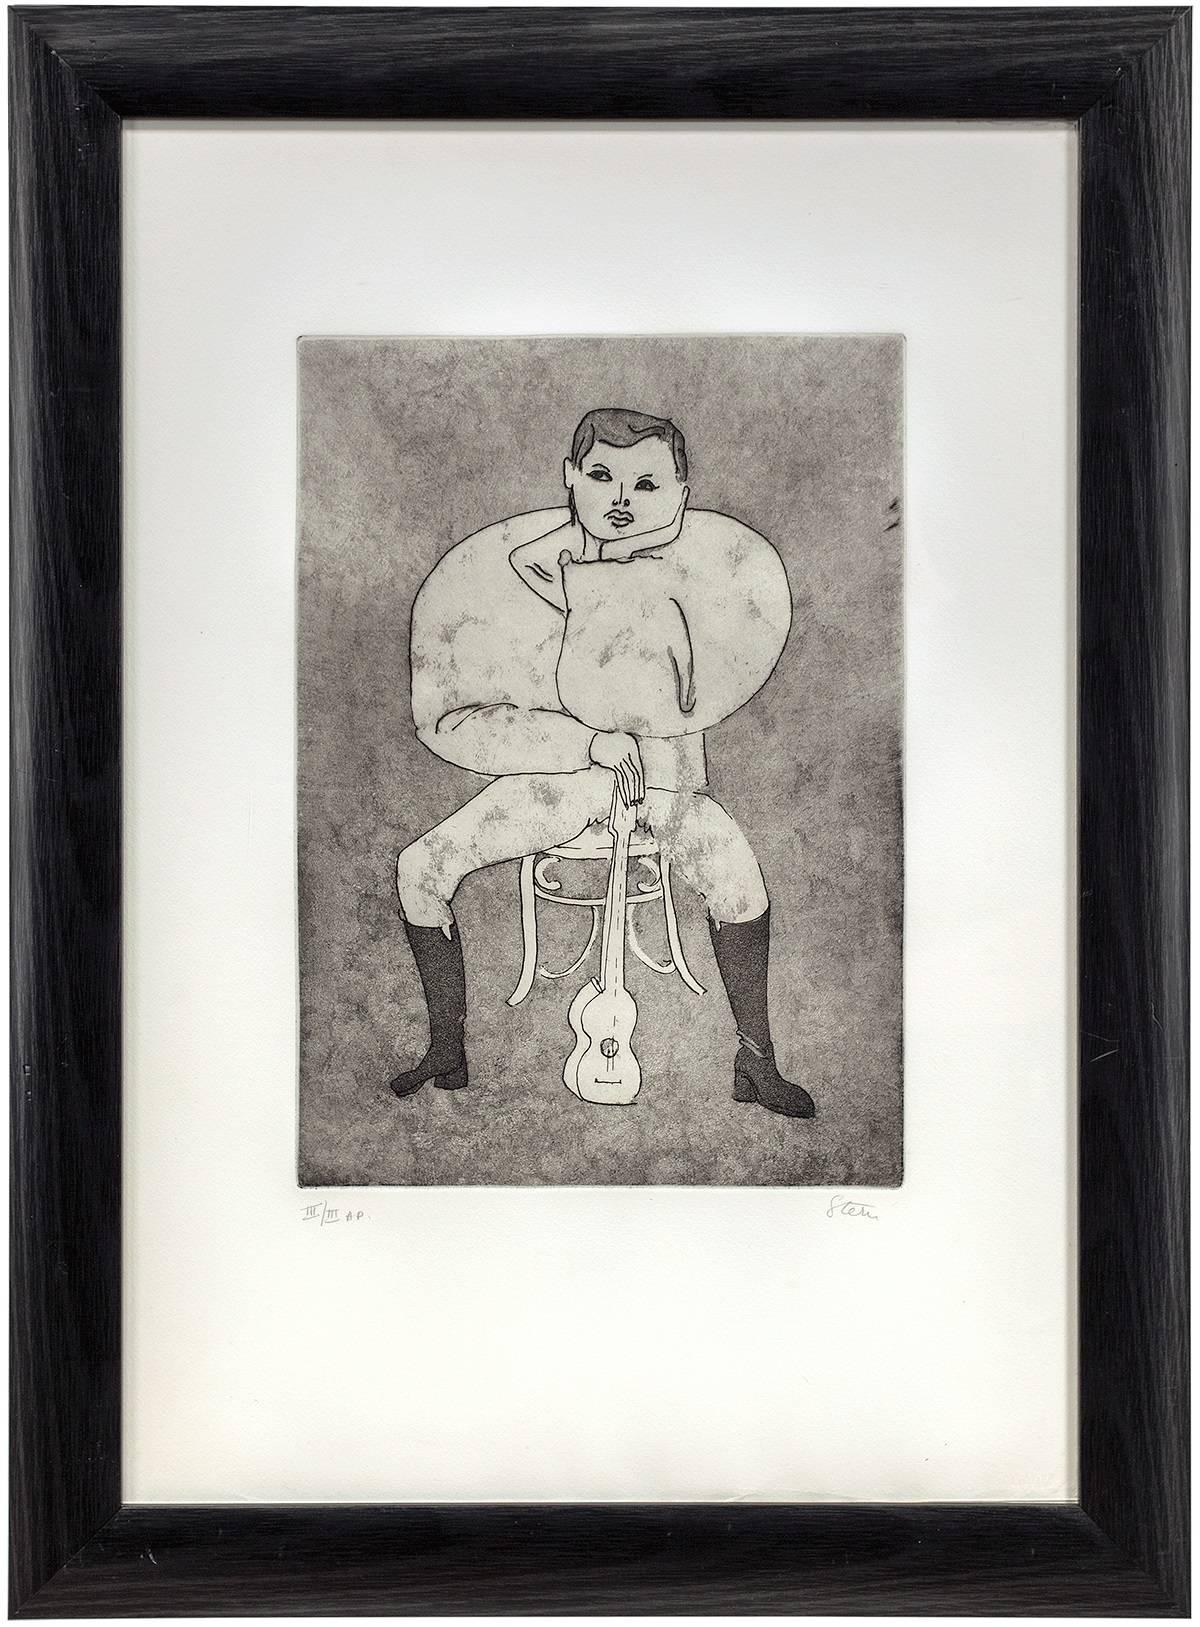 Genre: Other
Subject: Portrait
Medium: Aquatint Eching Print
Surface: Paper
Country: United States
Dimensions w/Frame: 30" x 22"

The artist Bernard Stern illustrates the figure of a boy in a non-realistic, caricature manner. The Guitar is